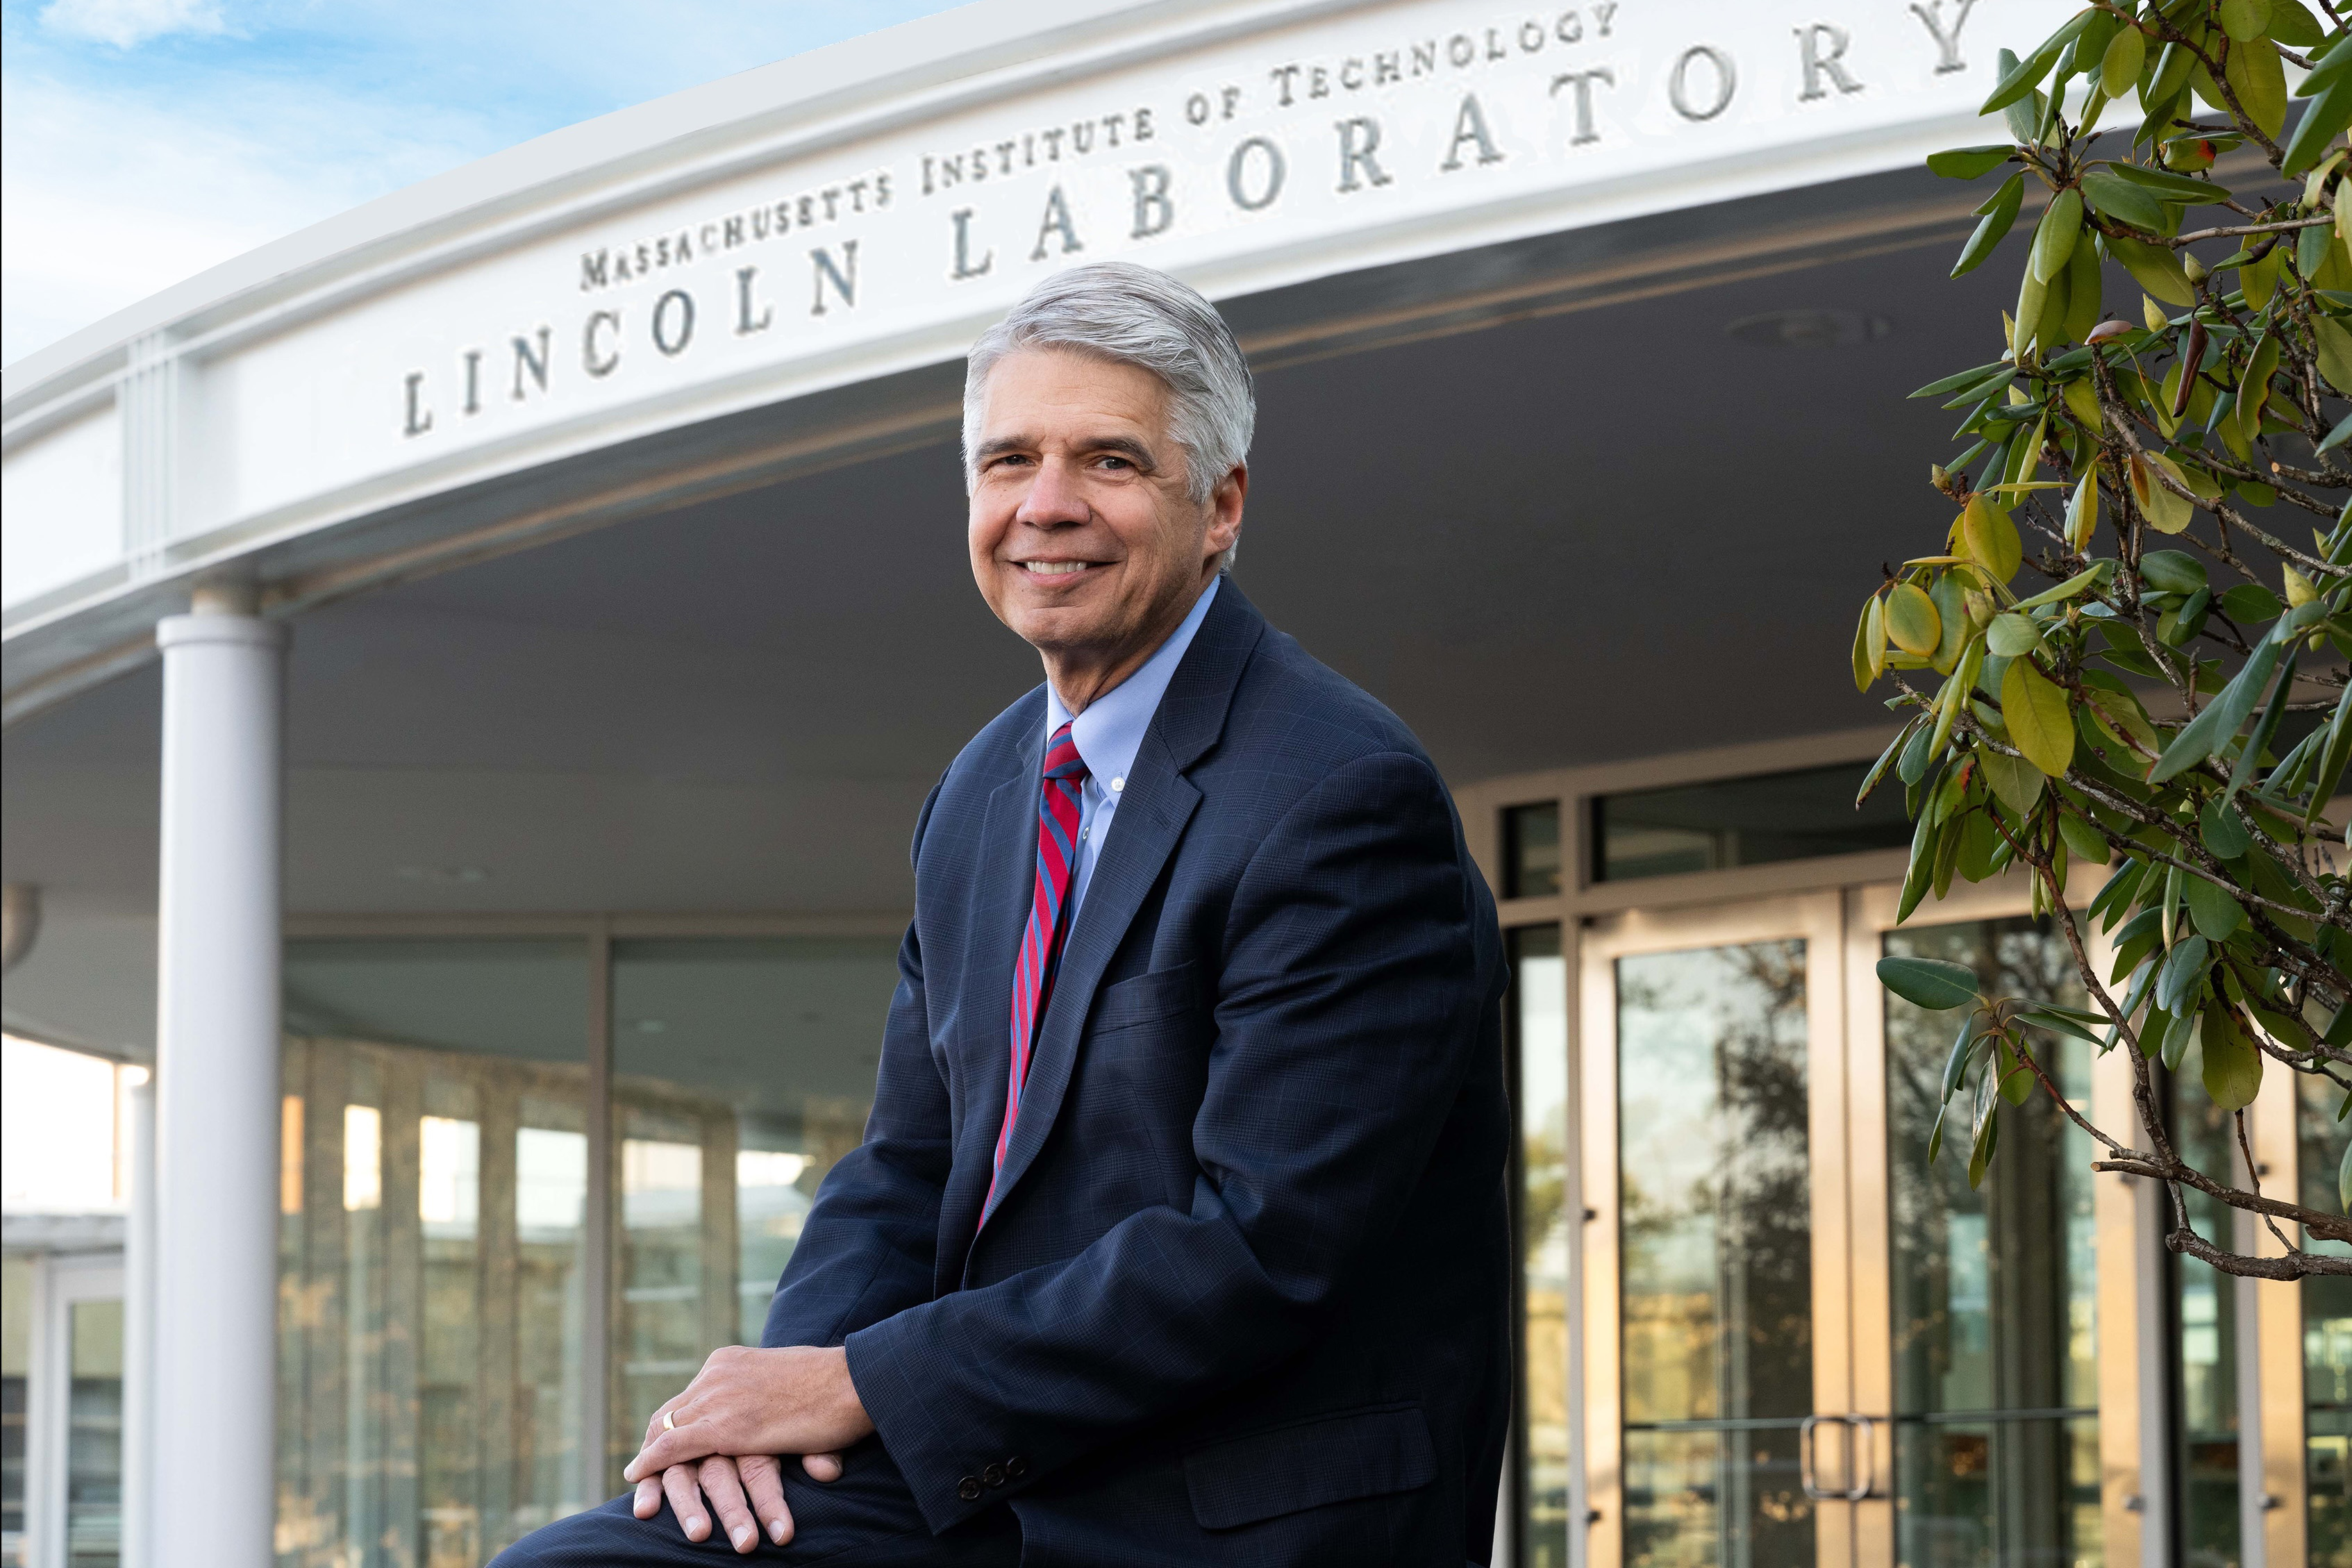 Eric Evans to step down as director of MIT Lincoln Laboratory, MIT News